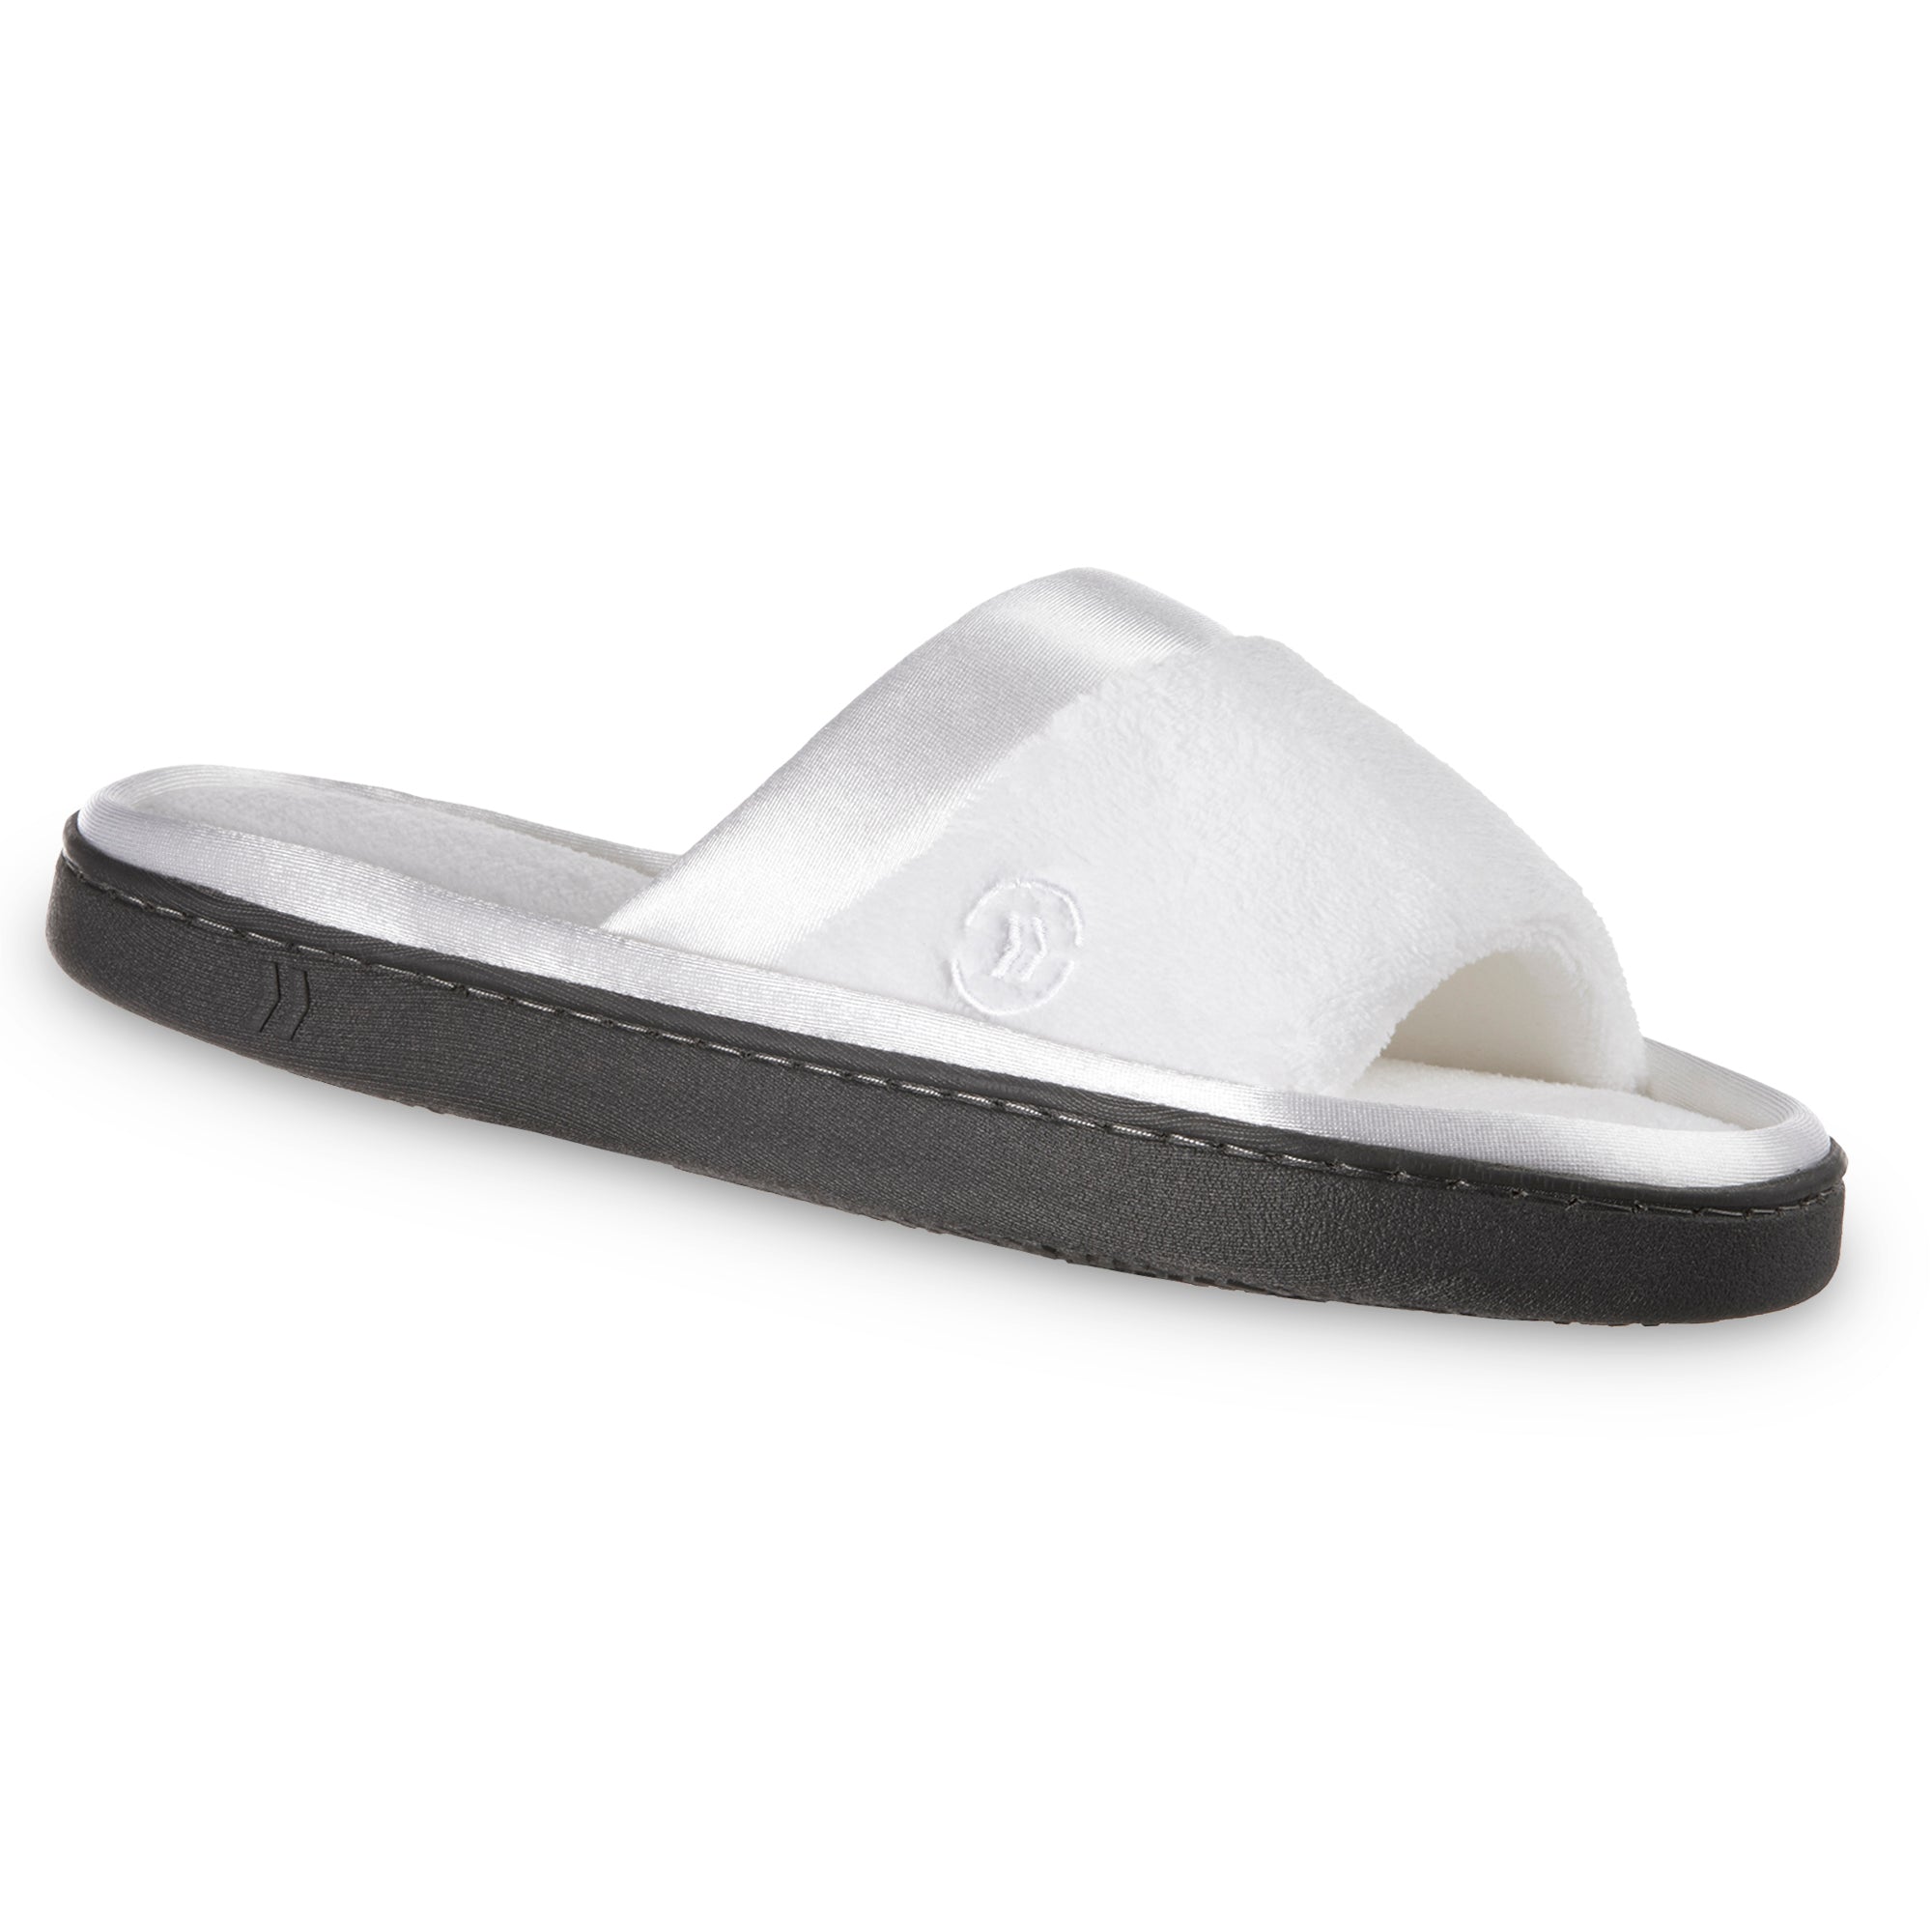 isotoner arch support slippers